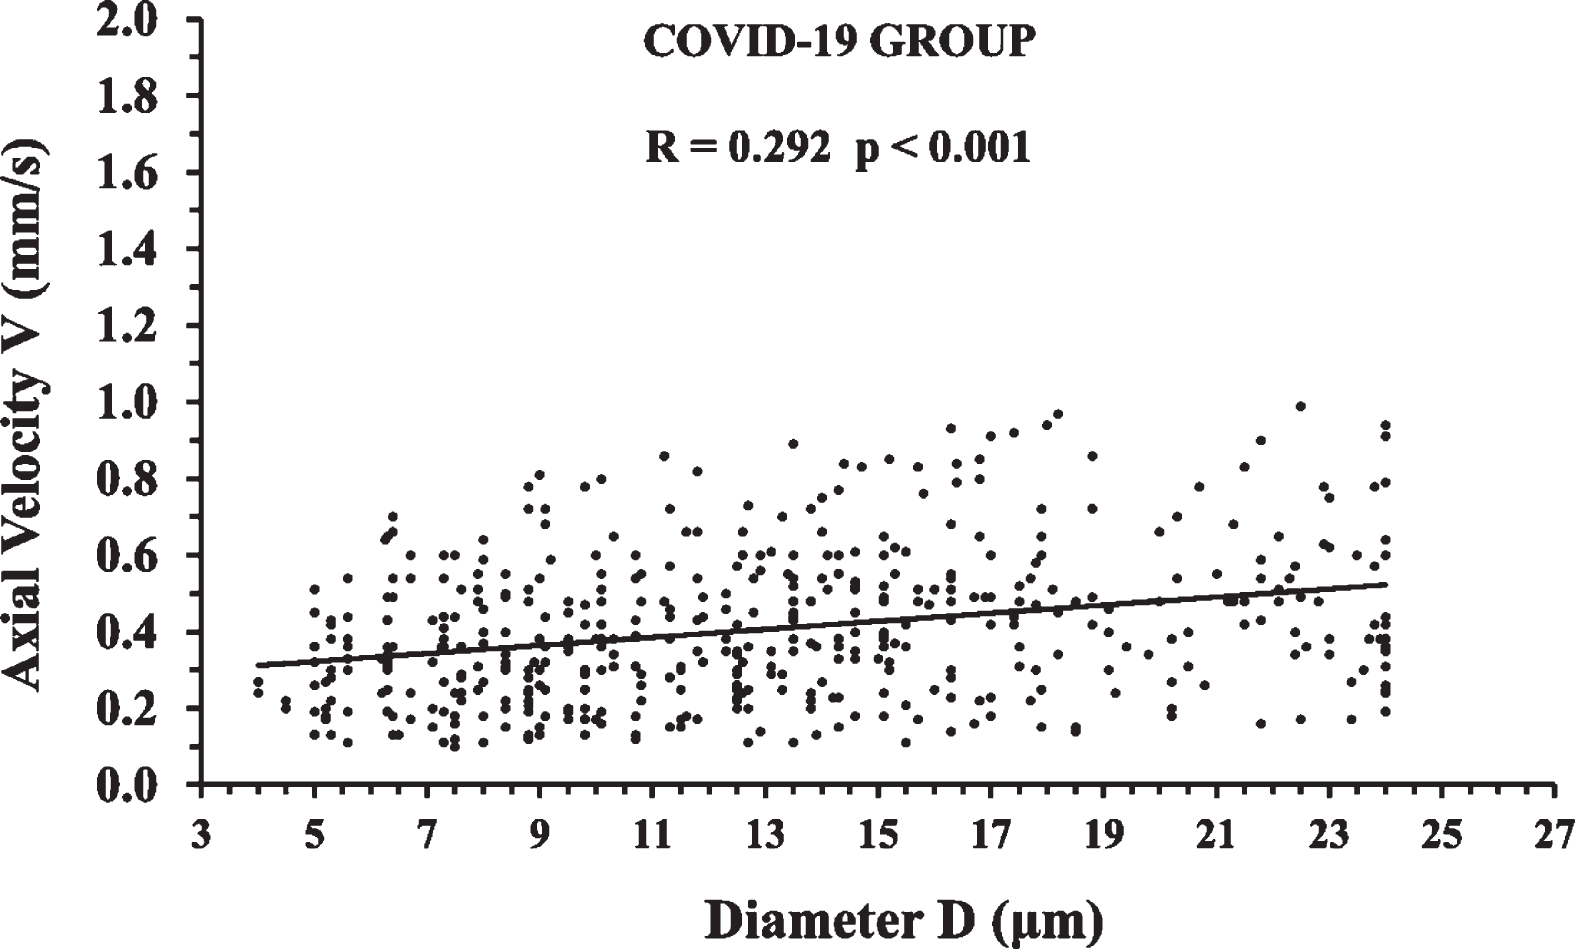 Axial velocity measurements of the COVID-19 Group in relation to microvessel diameter. The correlation was statistically significant (p < 0.001) and the linear regression line is shown with a solid black line.